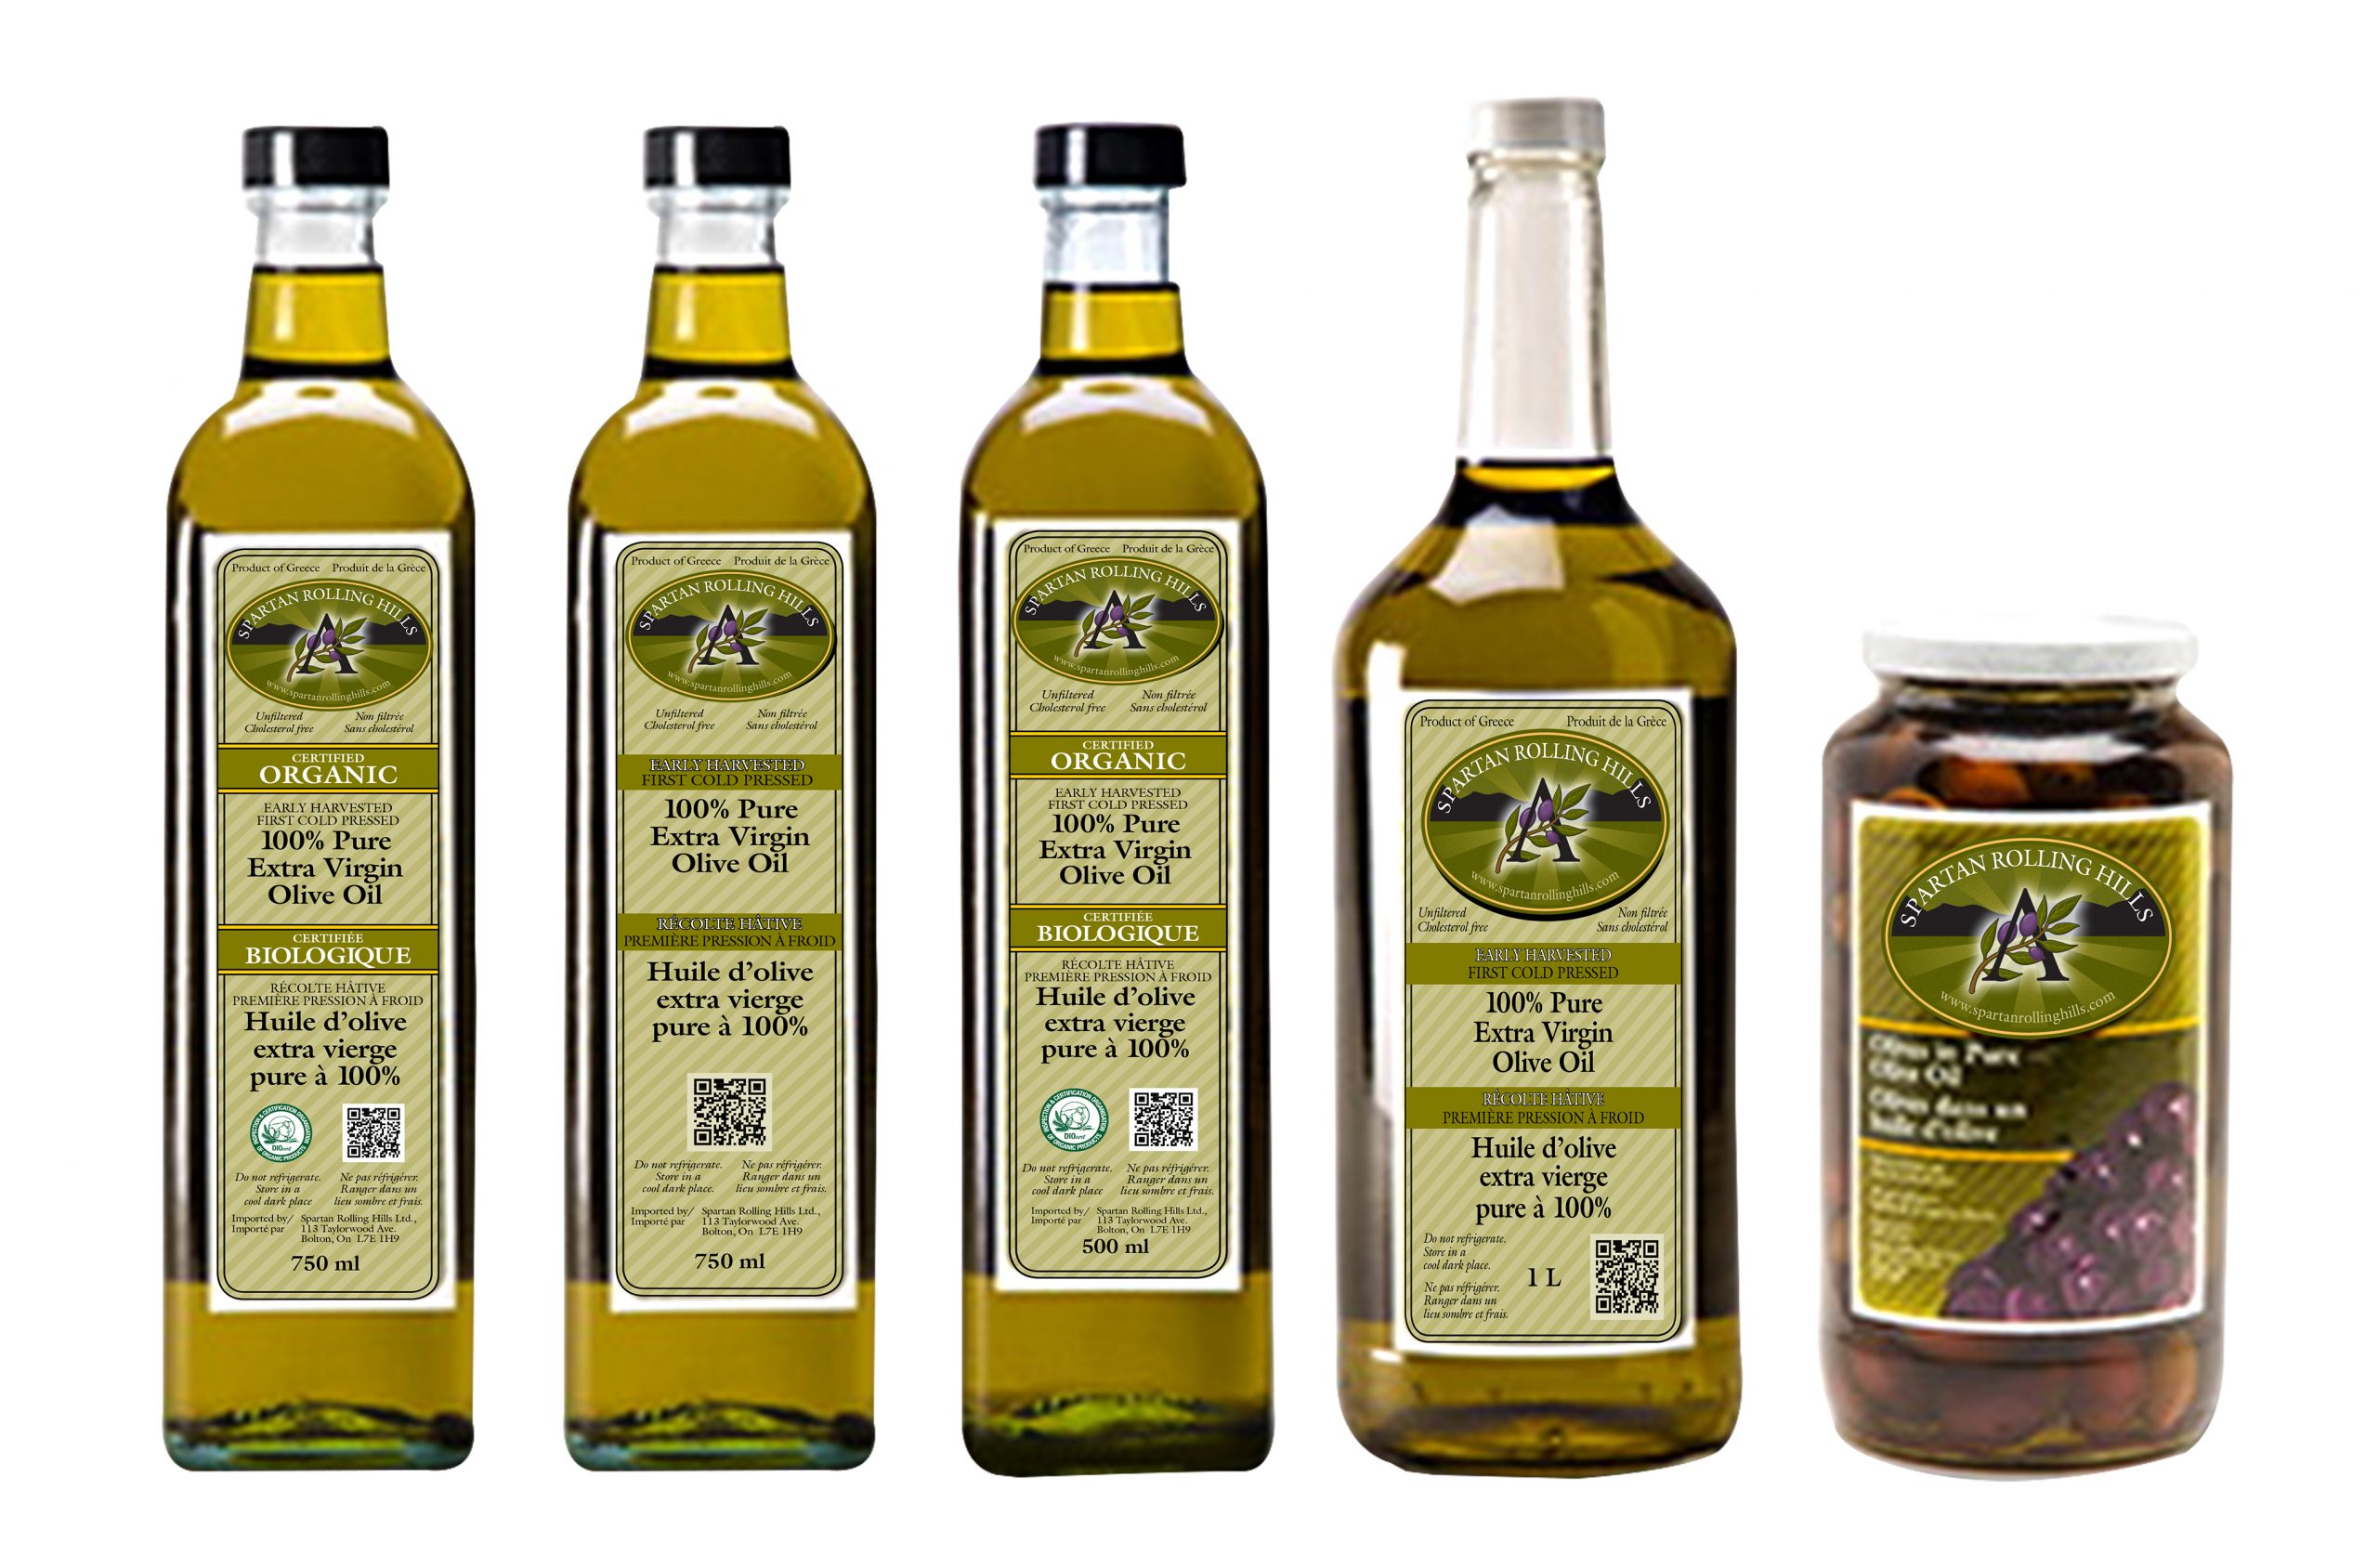 SRH Organic, Regular and Olives in EVOO